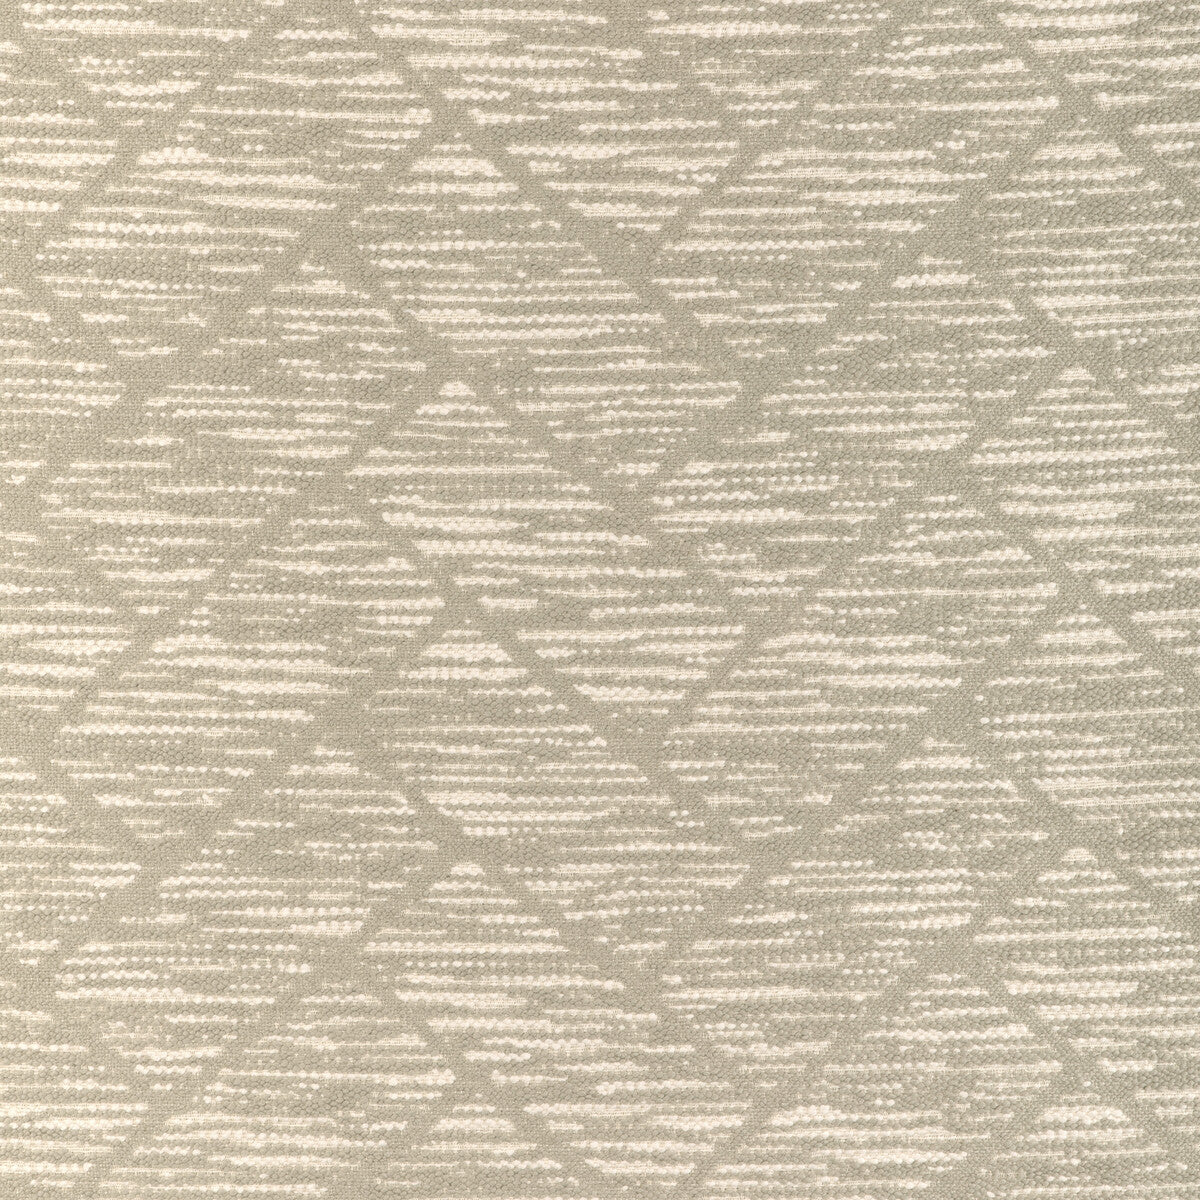 Kudo fabric in linen color - pattern 36890.16.0 - by Kravet Couture in the Atelier Weaves collection